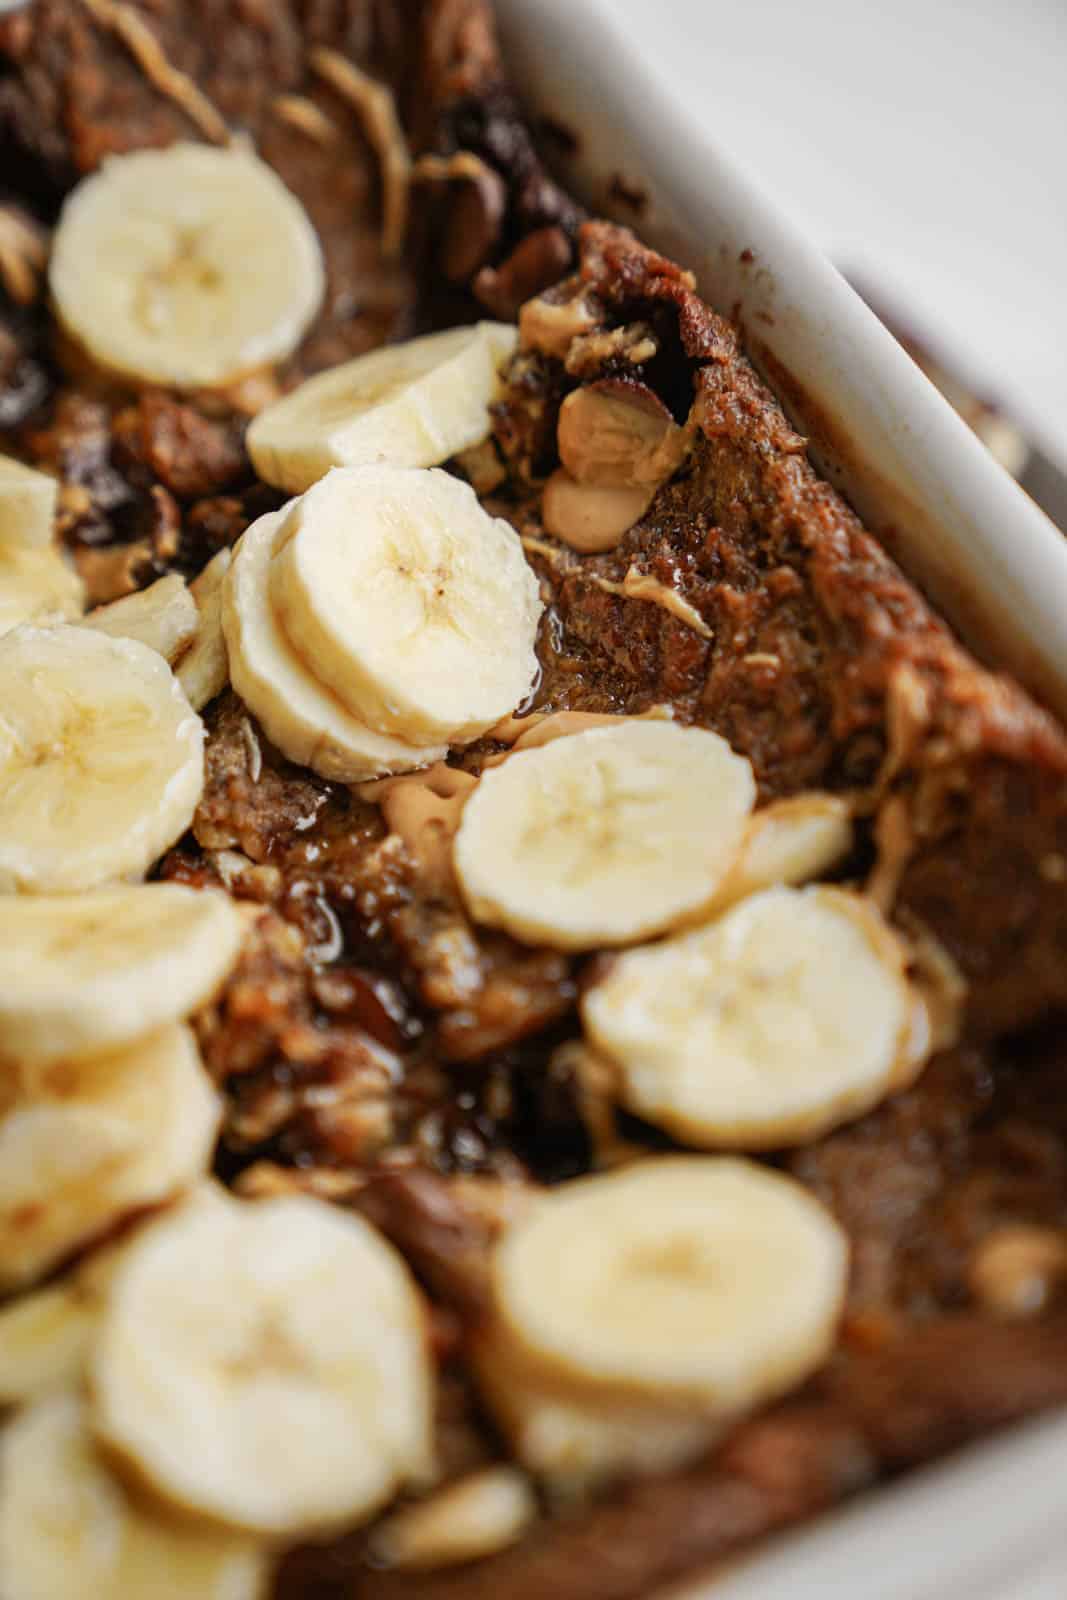 Vegan baked oatmeal with bananas cut on top.